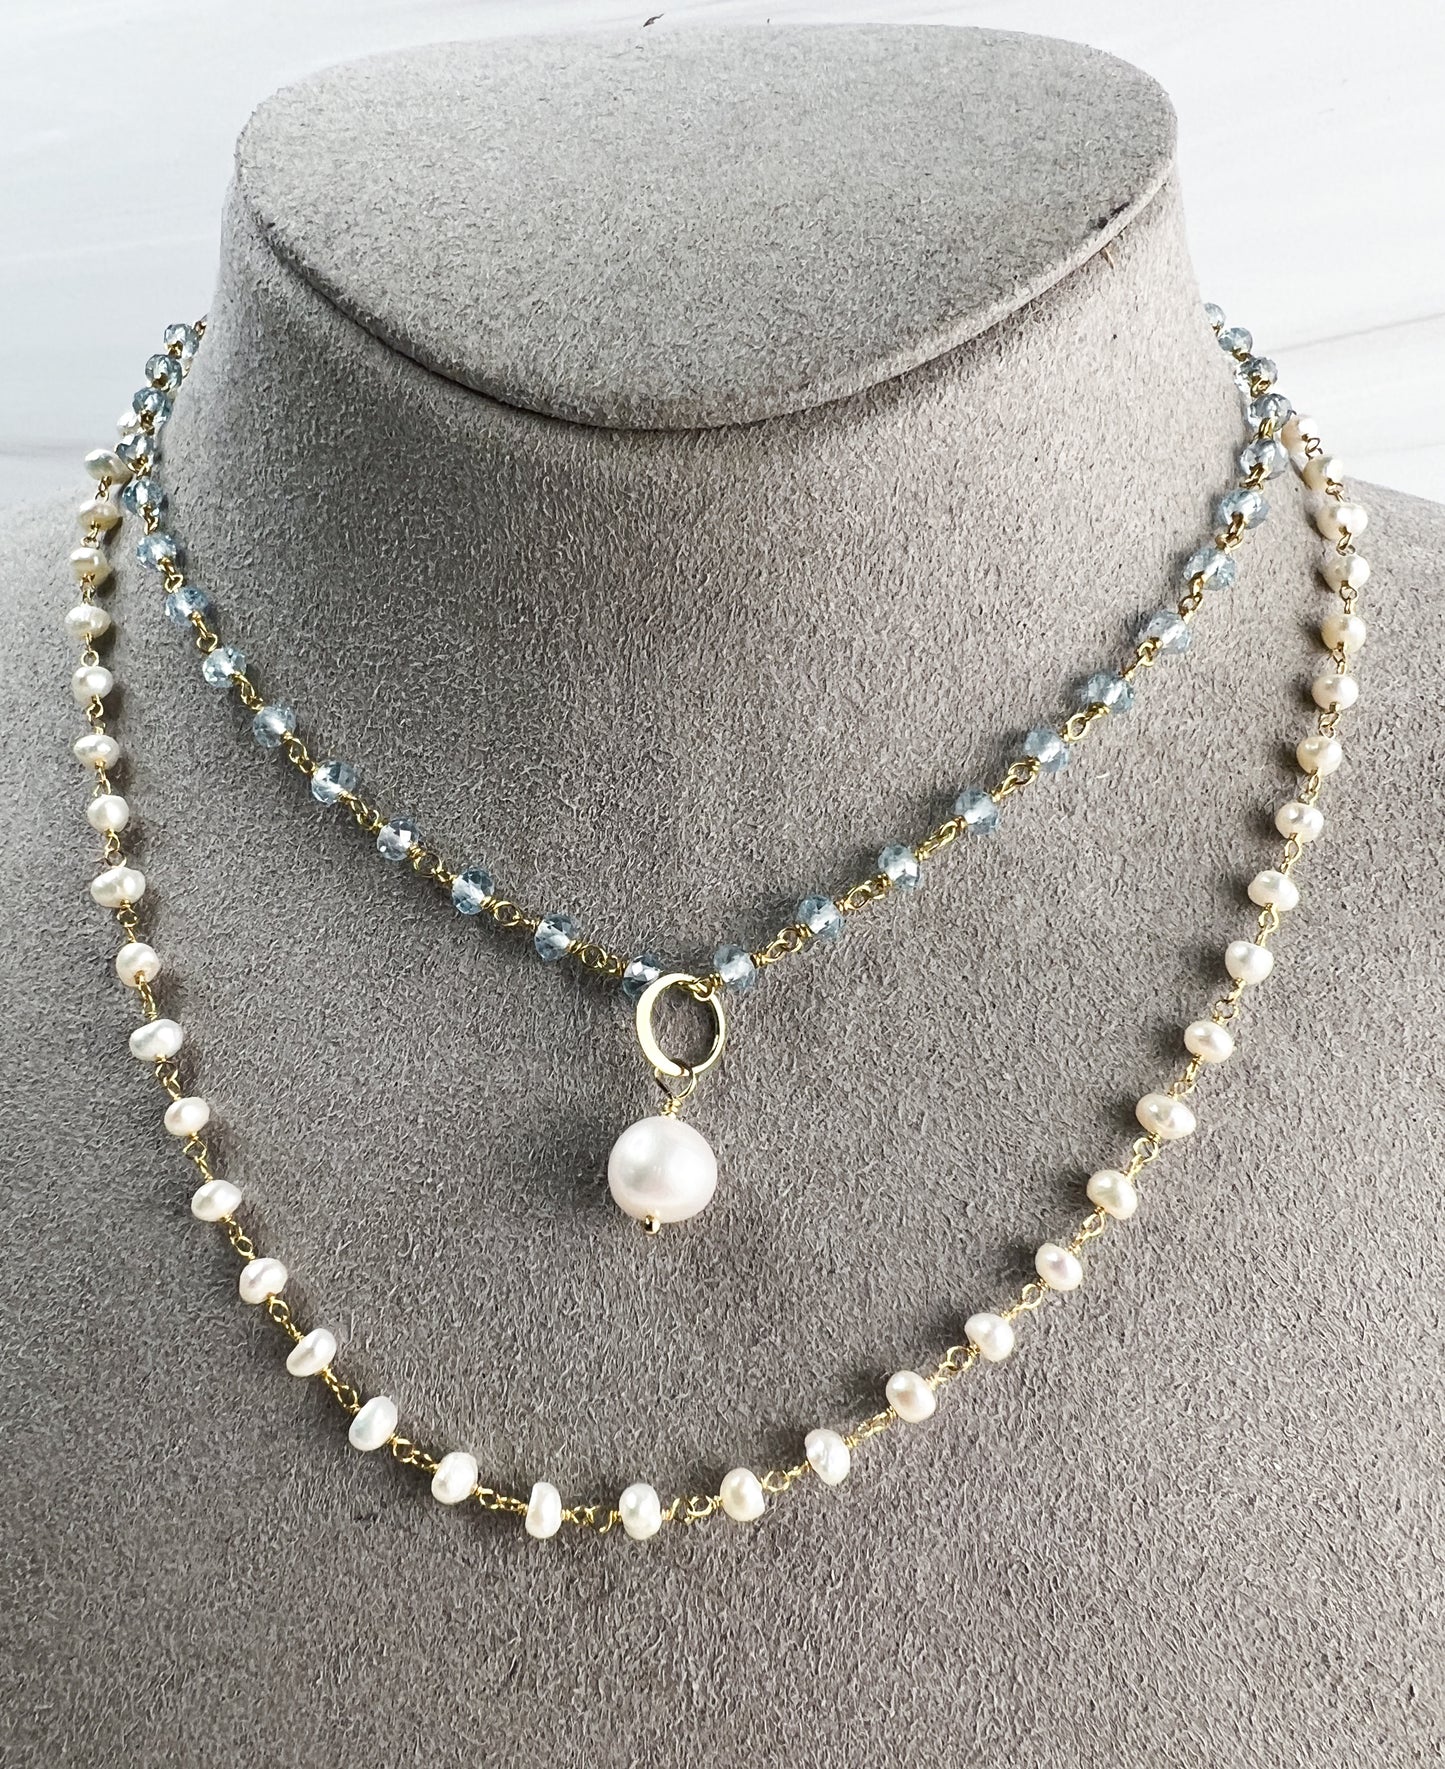 Blue Topaz & Freshwater Pearl Necklaces